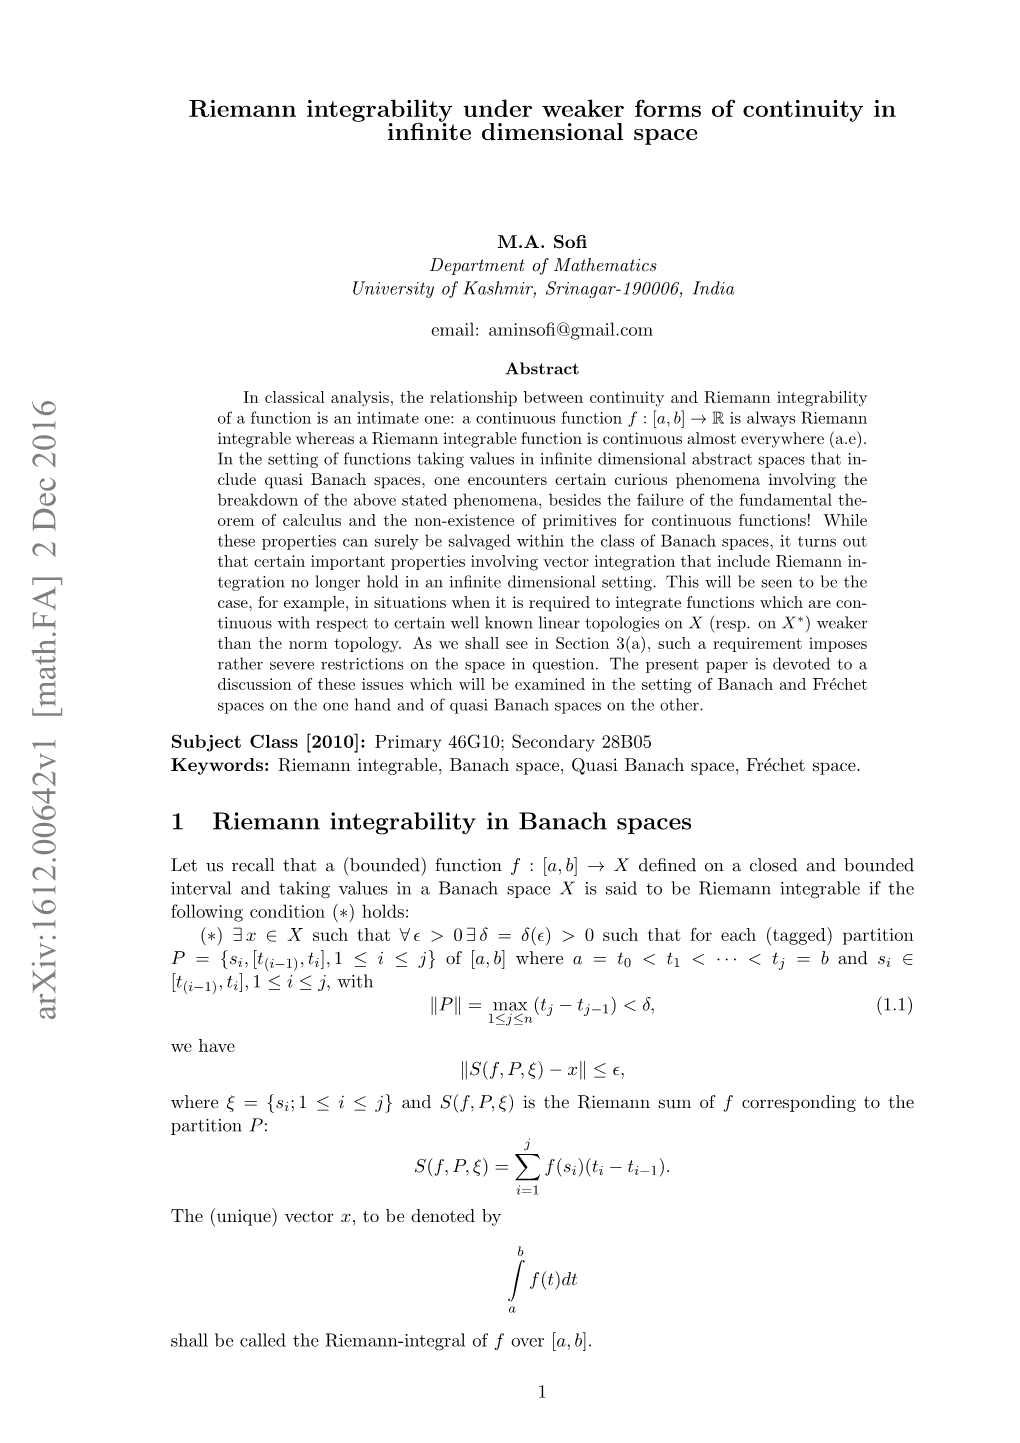 Riemann Integrability Under Weaker Forms of Continuity in Infinite